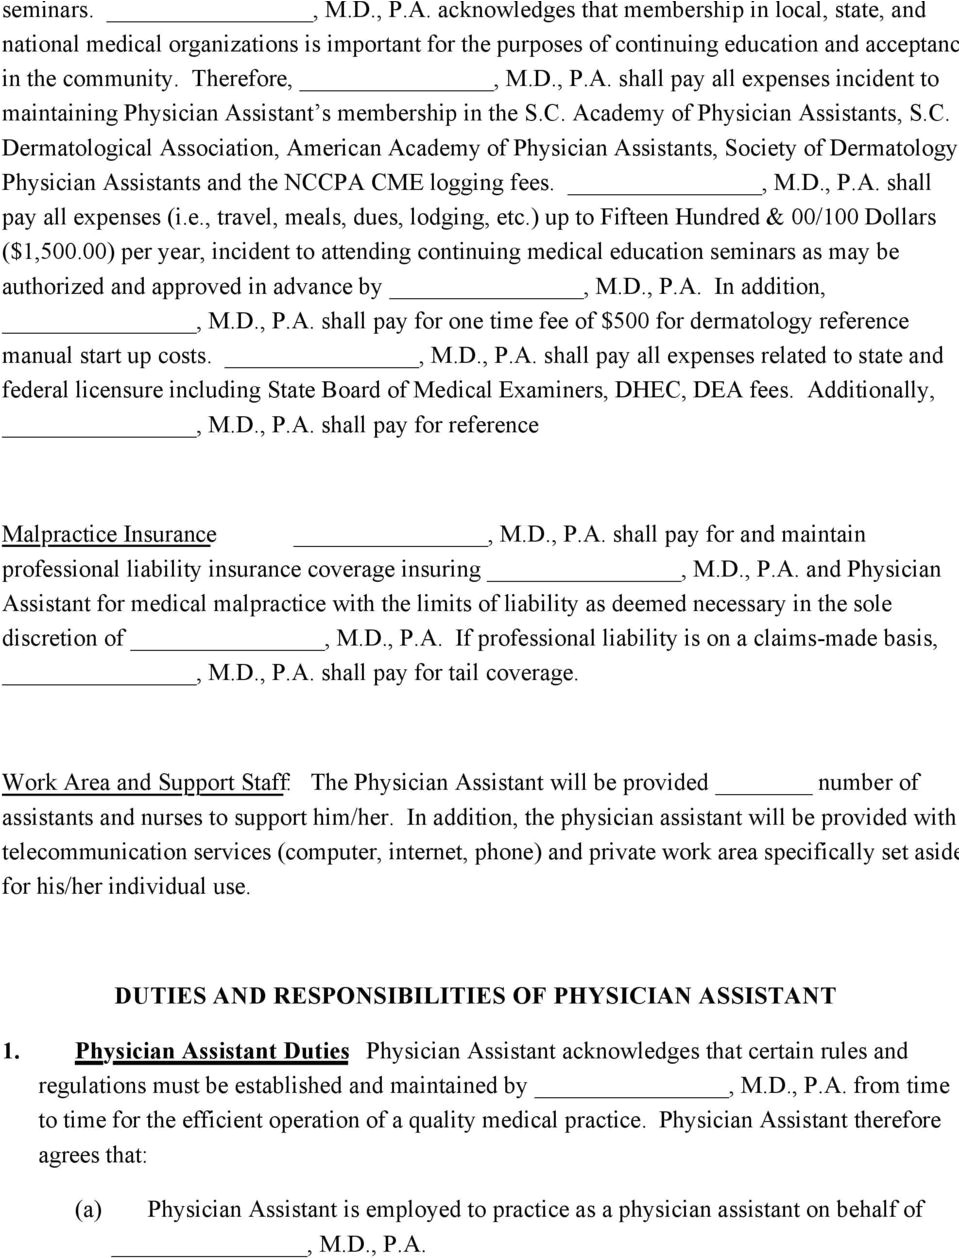 11465279 physician assistant employment agreement terms of agreement